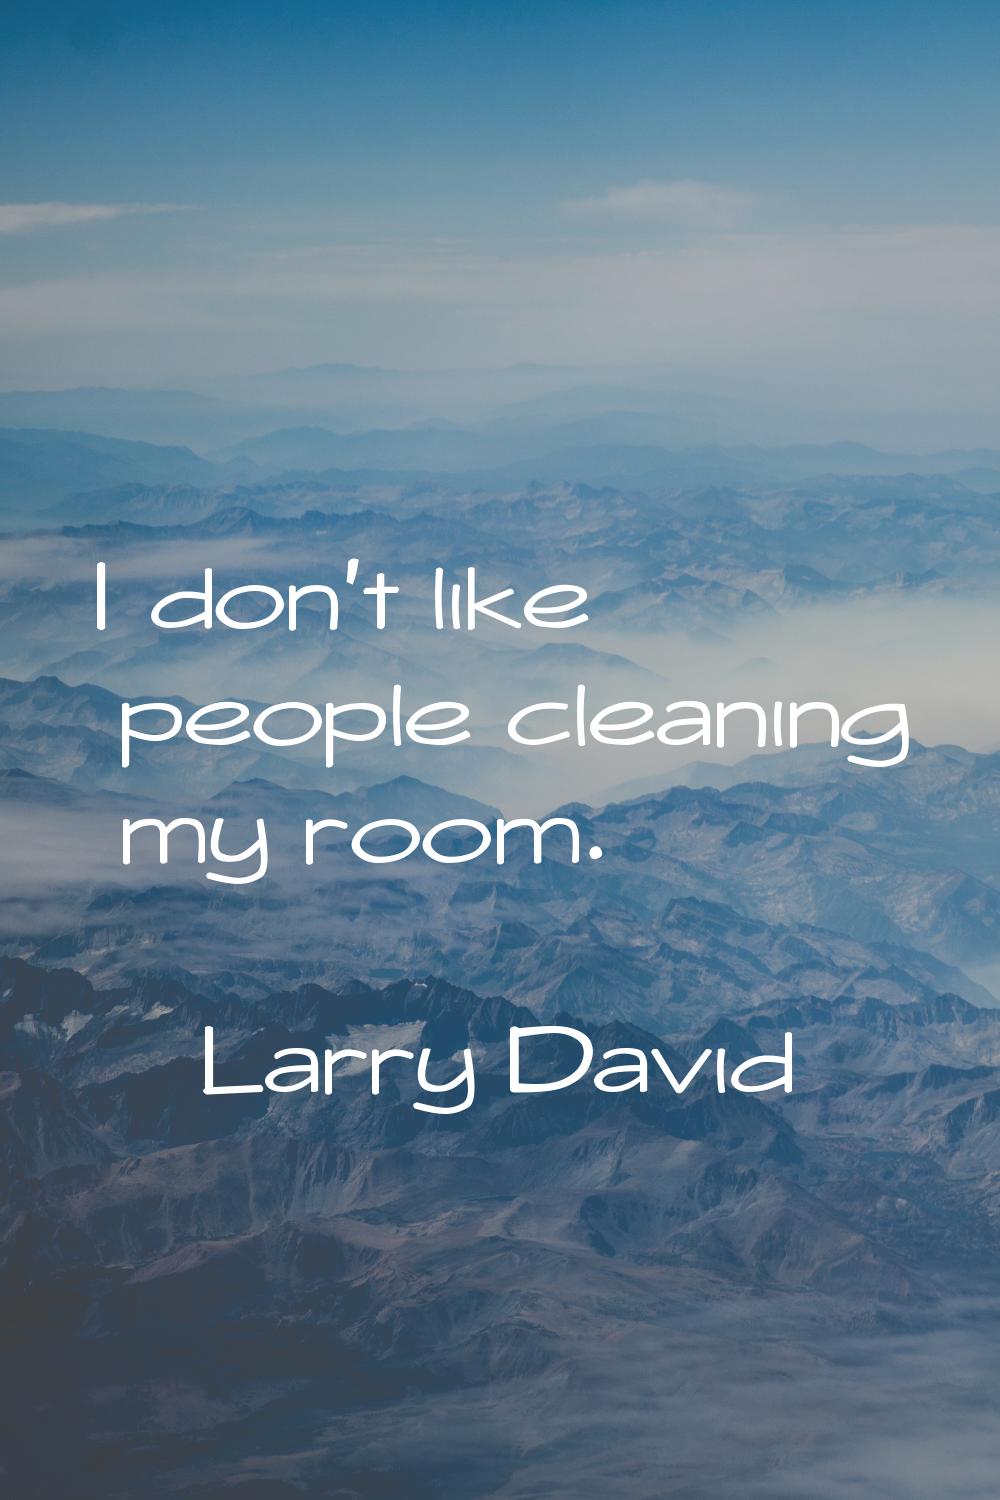 I don't like people cleaning my room.